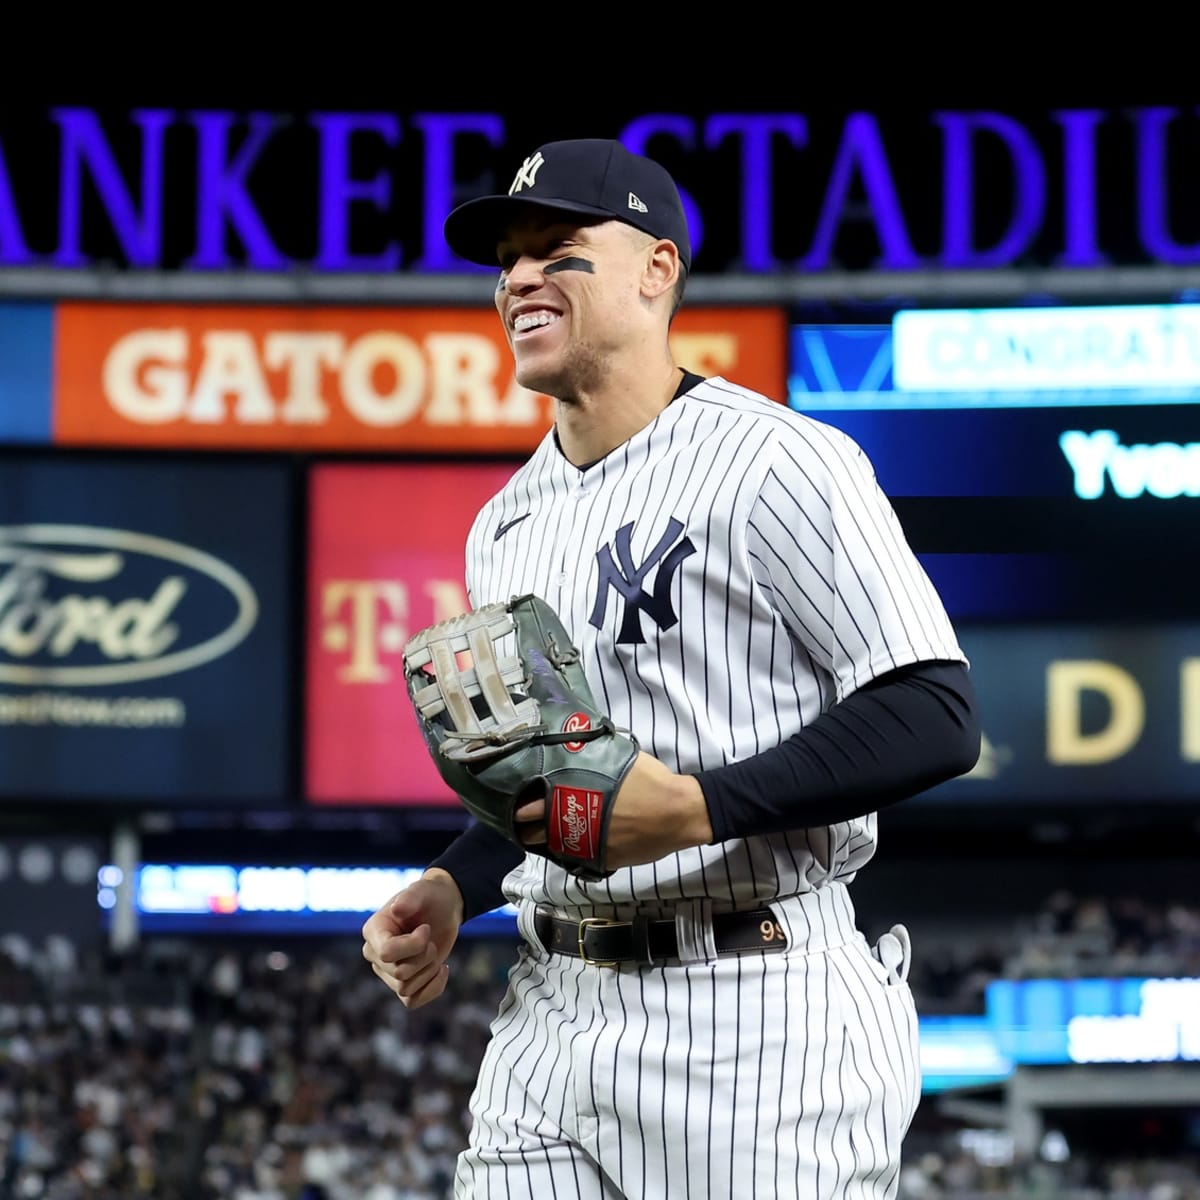 Aaron Judge was robbed of an MVP award, and the league agrees